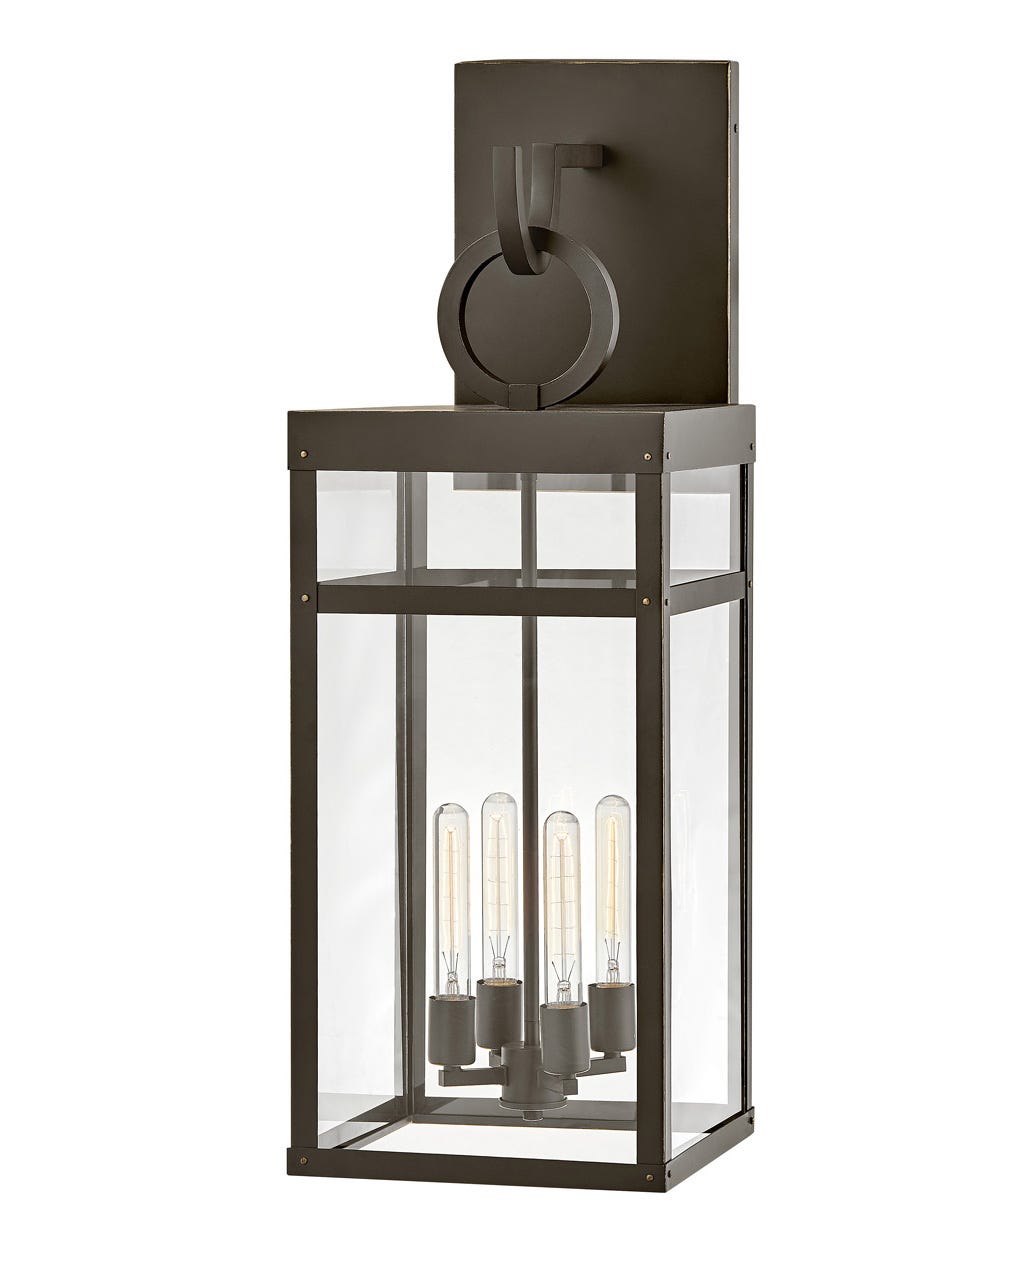 OUTDOOR PORTER Wall Mount Lantern Outdoor l Wall Hinkley Oil Rubbed Bronze 12.75x12.0x35.25 